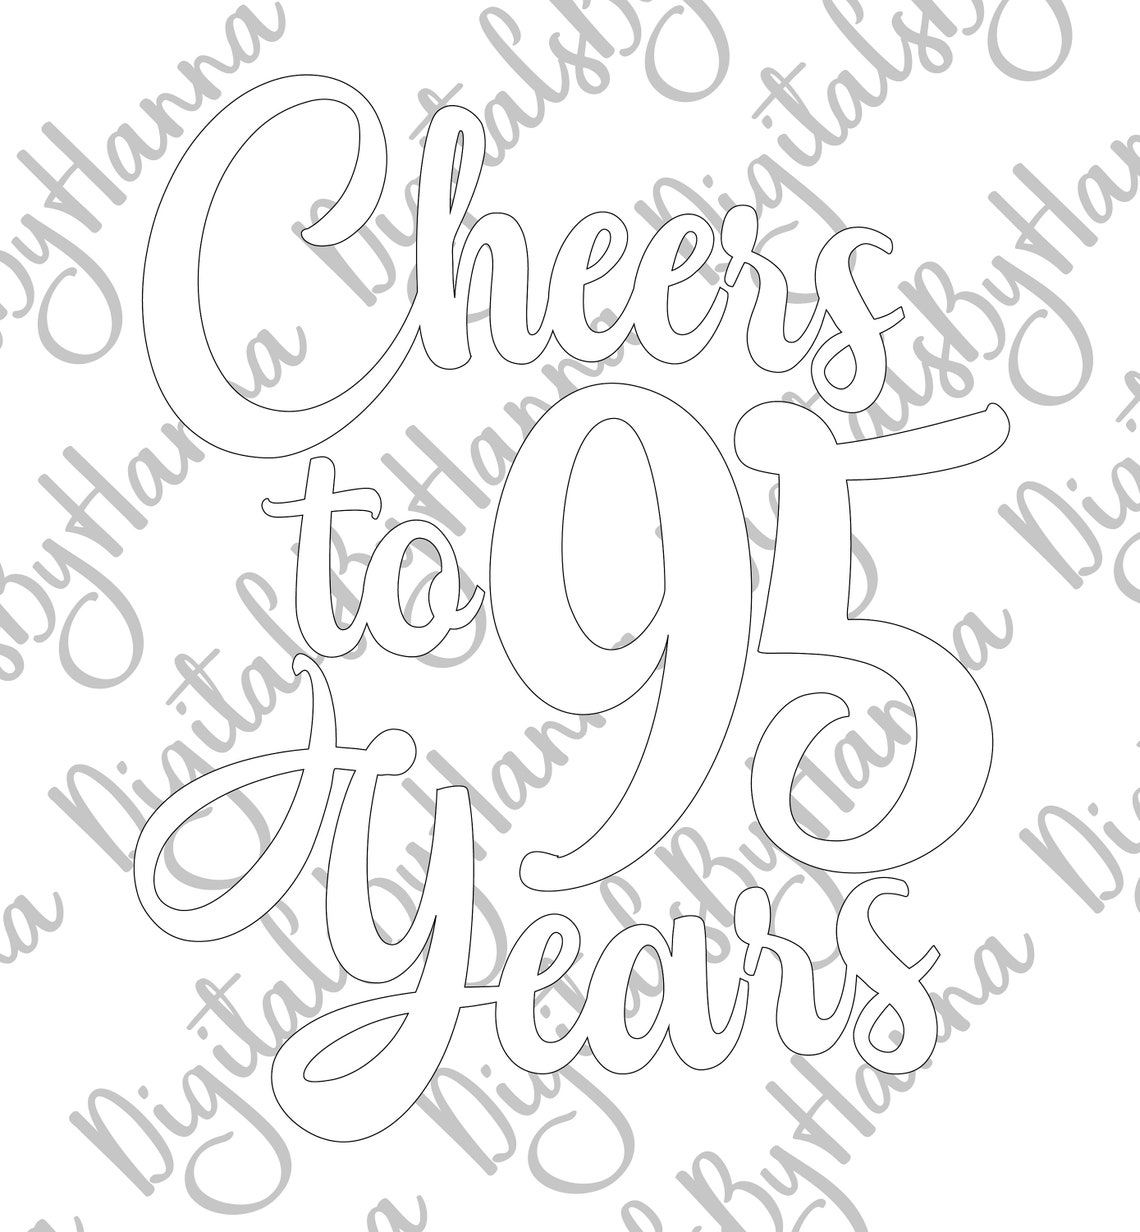 95th Birthday SVG Files for Cricut Sayings Cheers to 95 Years - Etsy